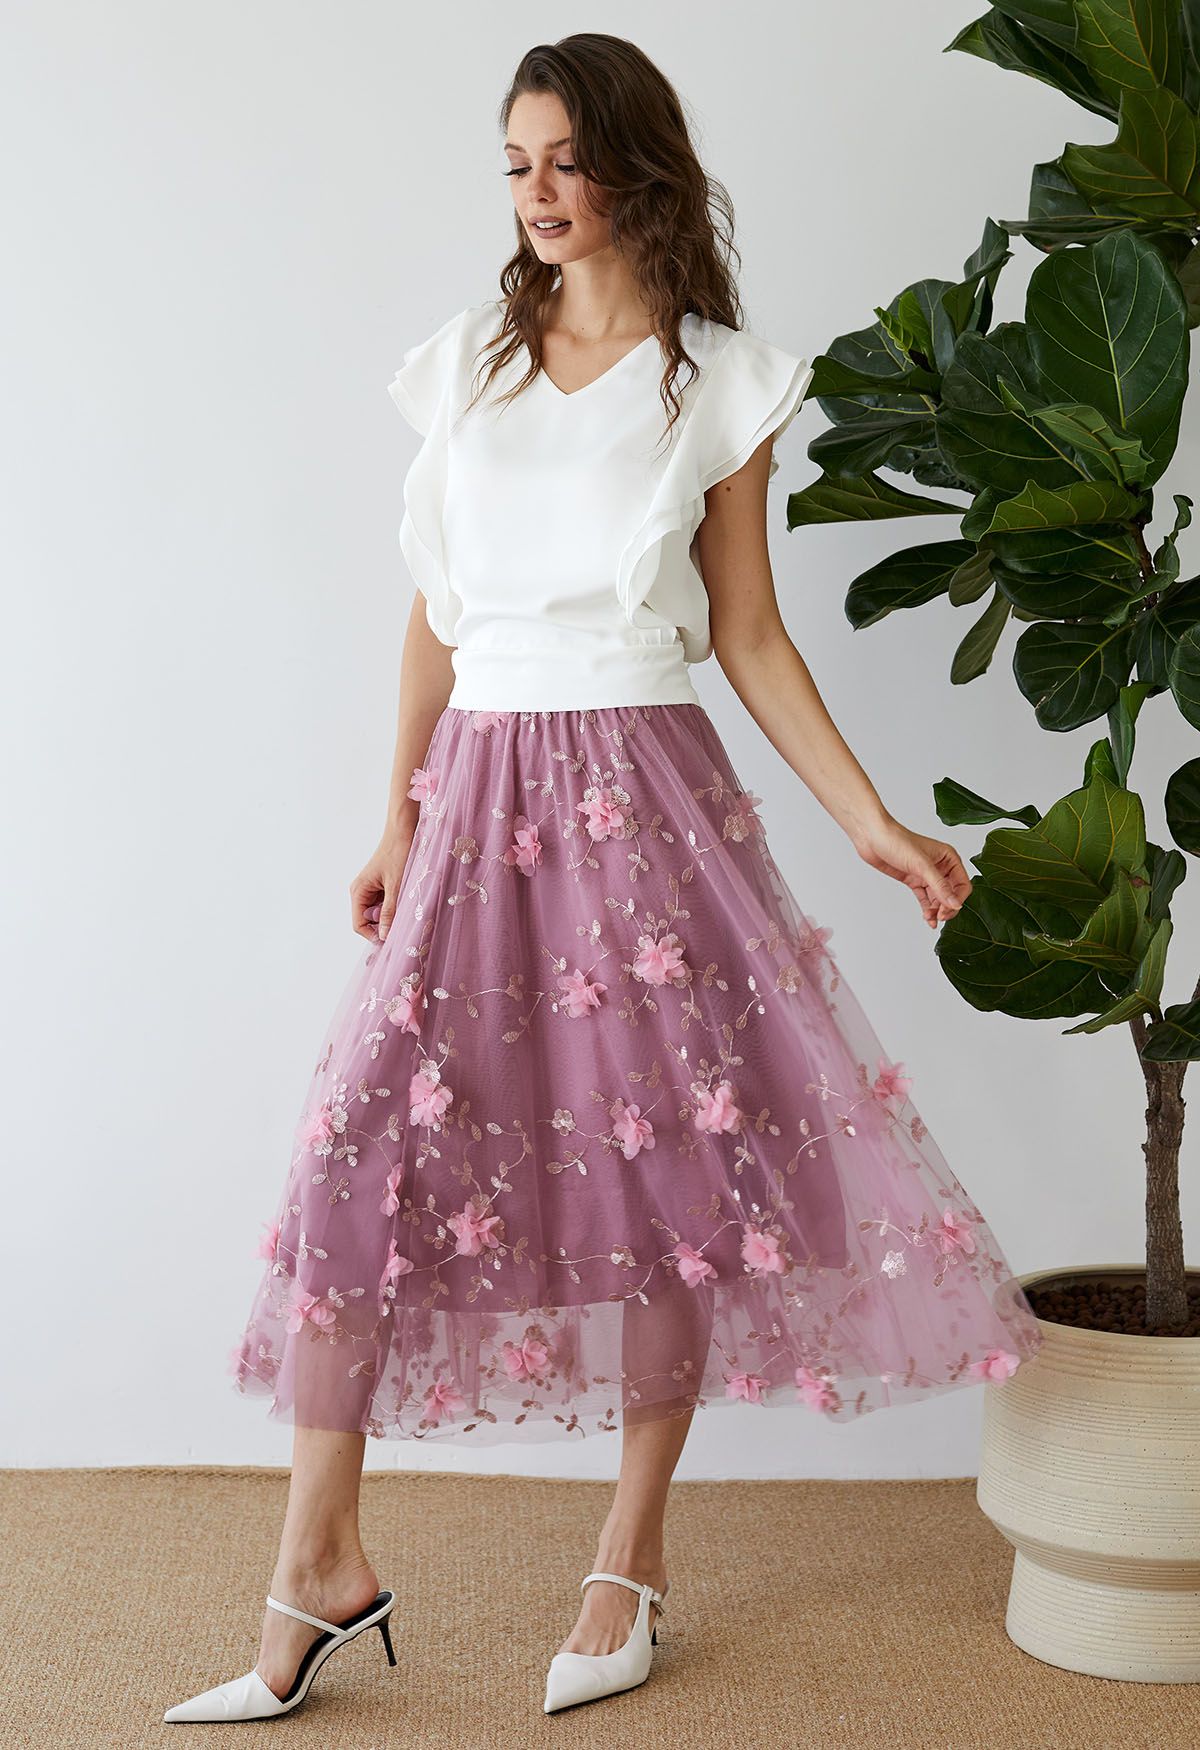 3D Mesh Flower Embroidered Tulle Midi Skirt in Lilac